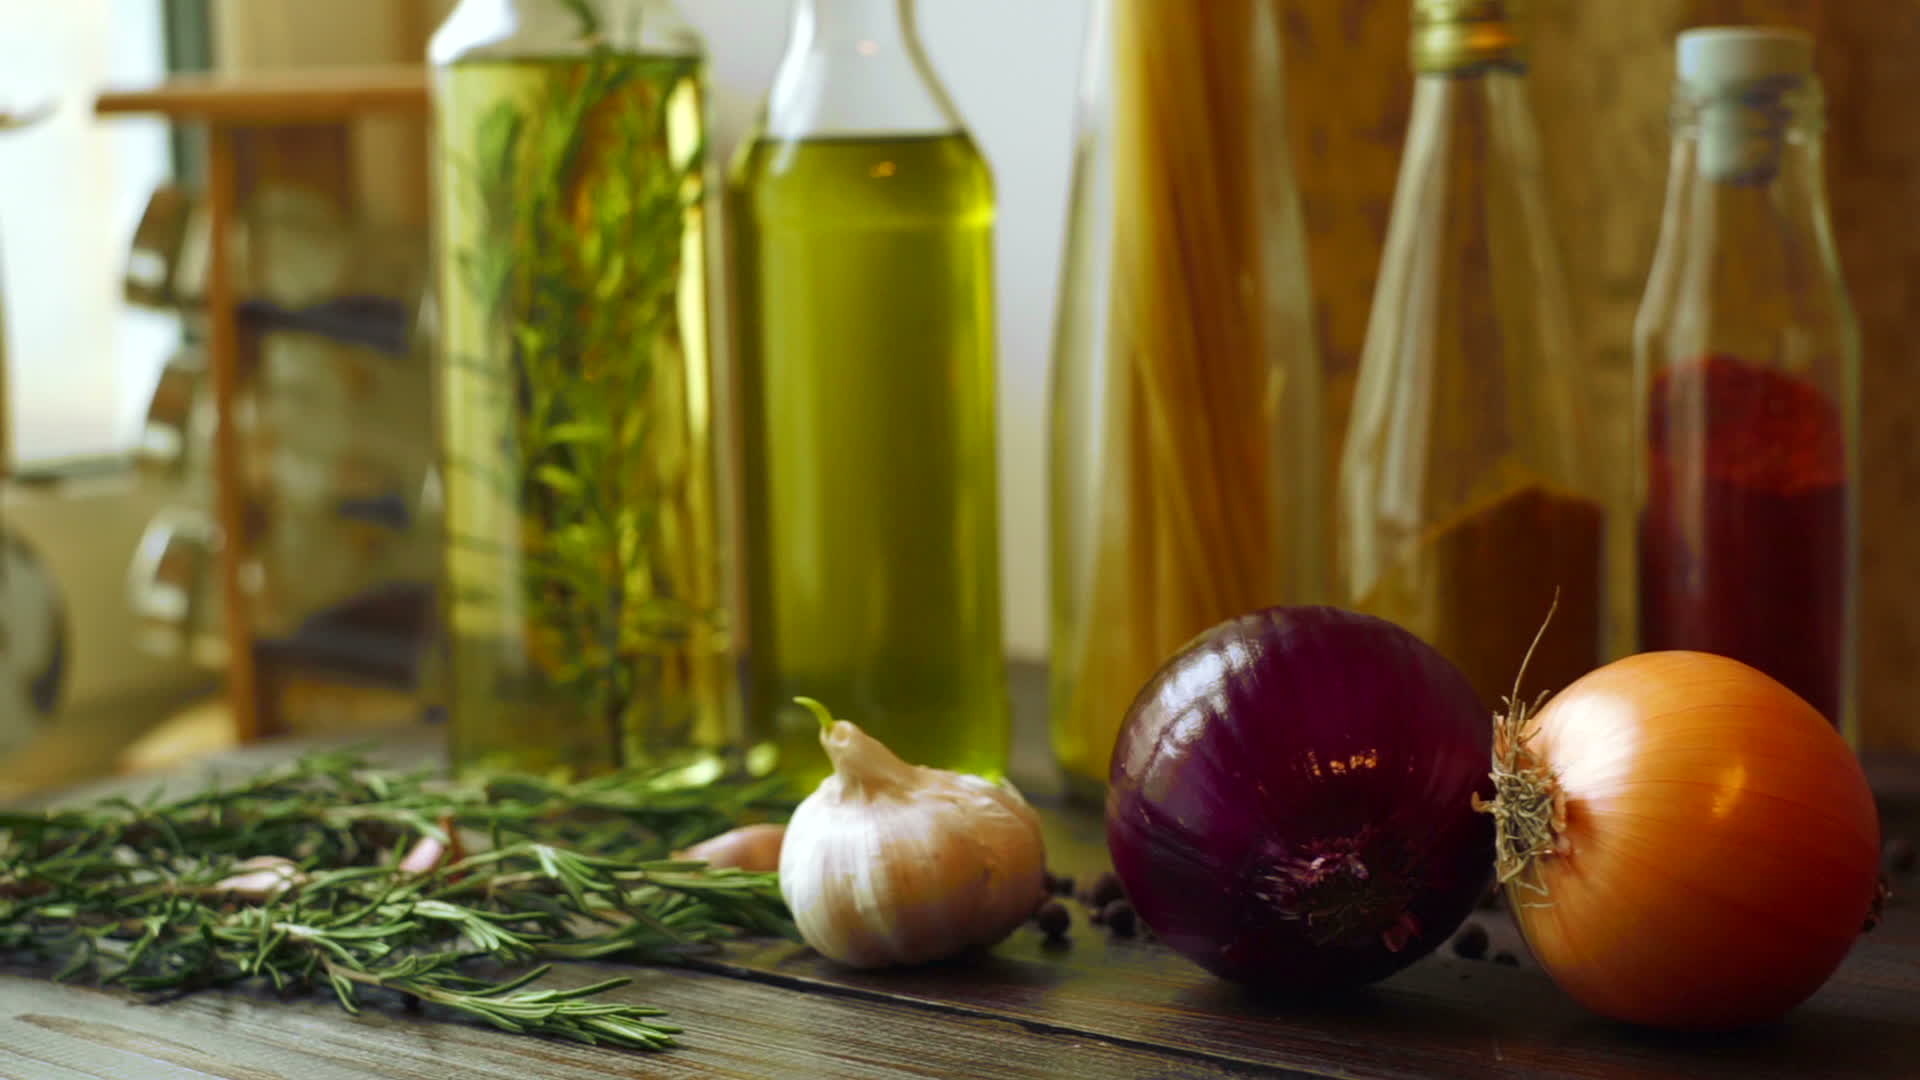 Food ingredients, Kitchen table, Rosemary herb, Garlic and onion, 1920x1080 Full HD Desktop